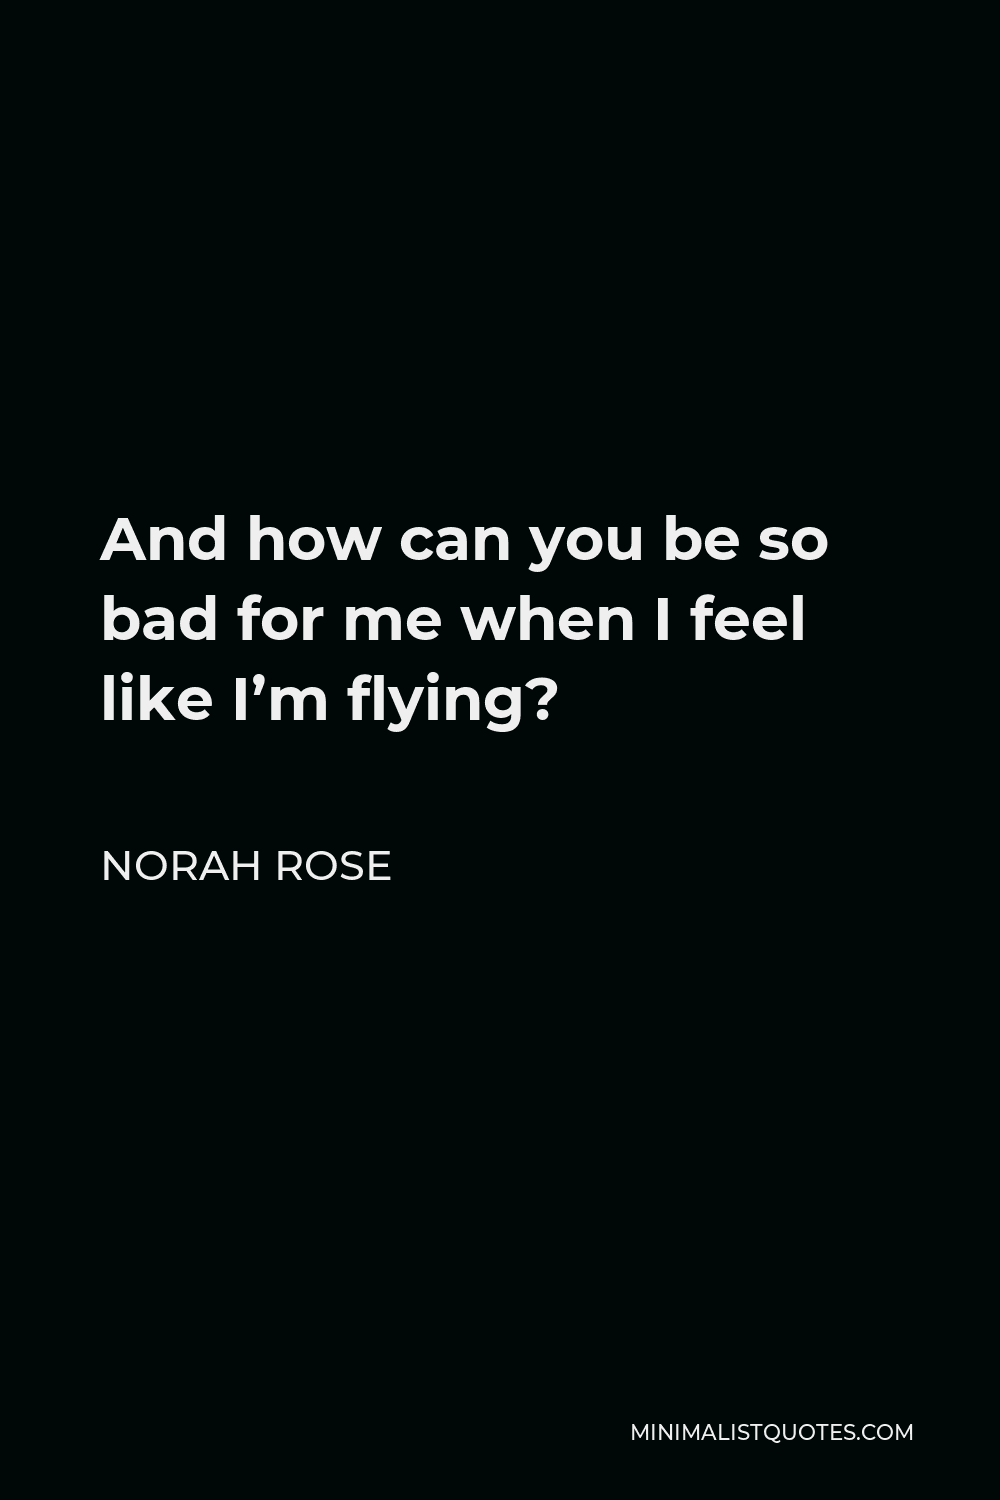 Norah Rose Quote - And how can you be so bad for me when I feel like I’m flying?